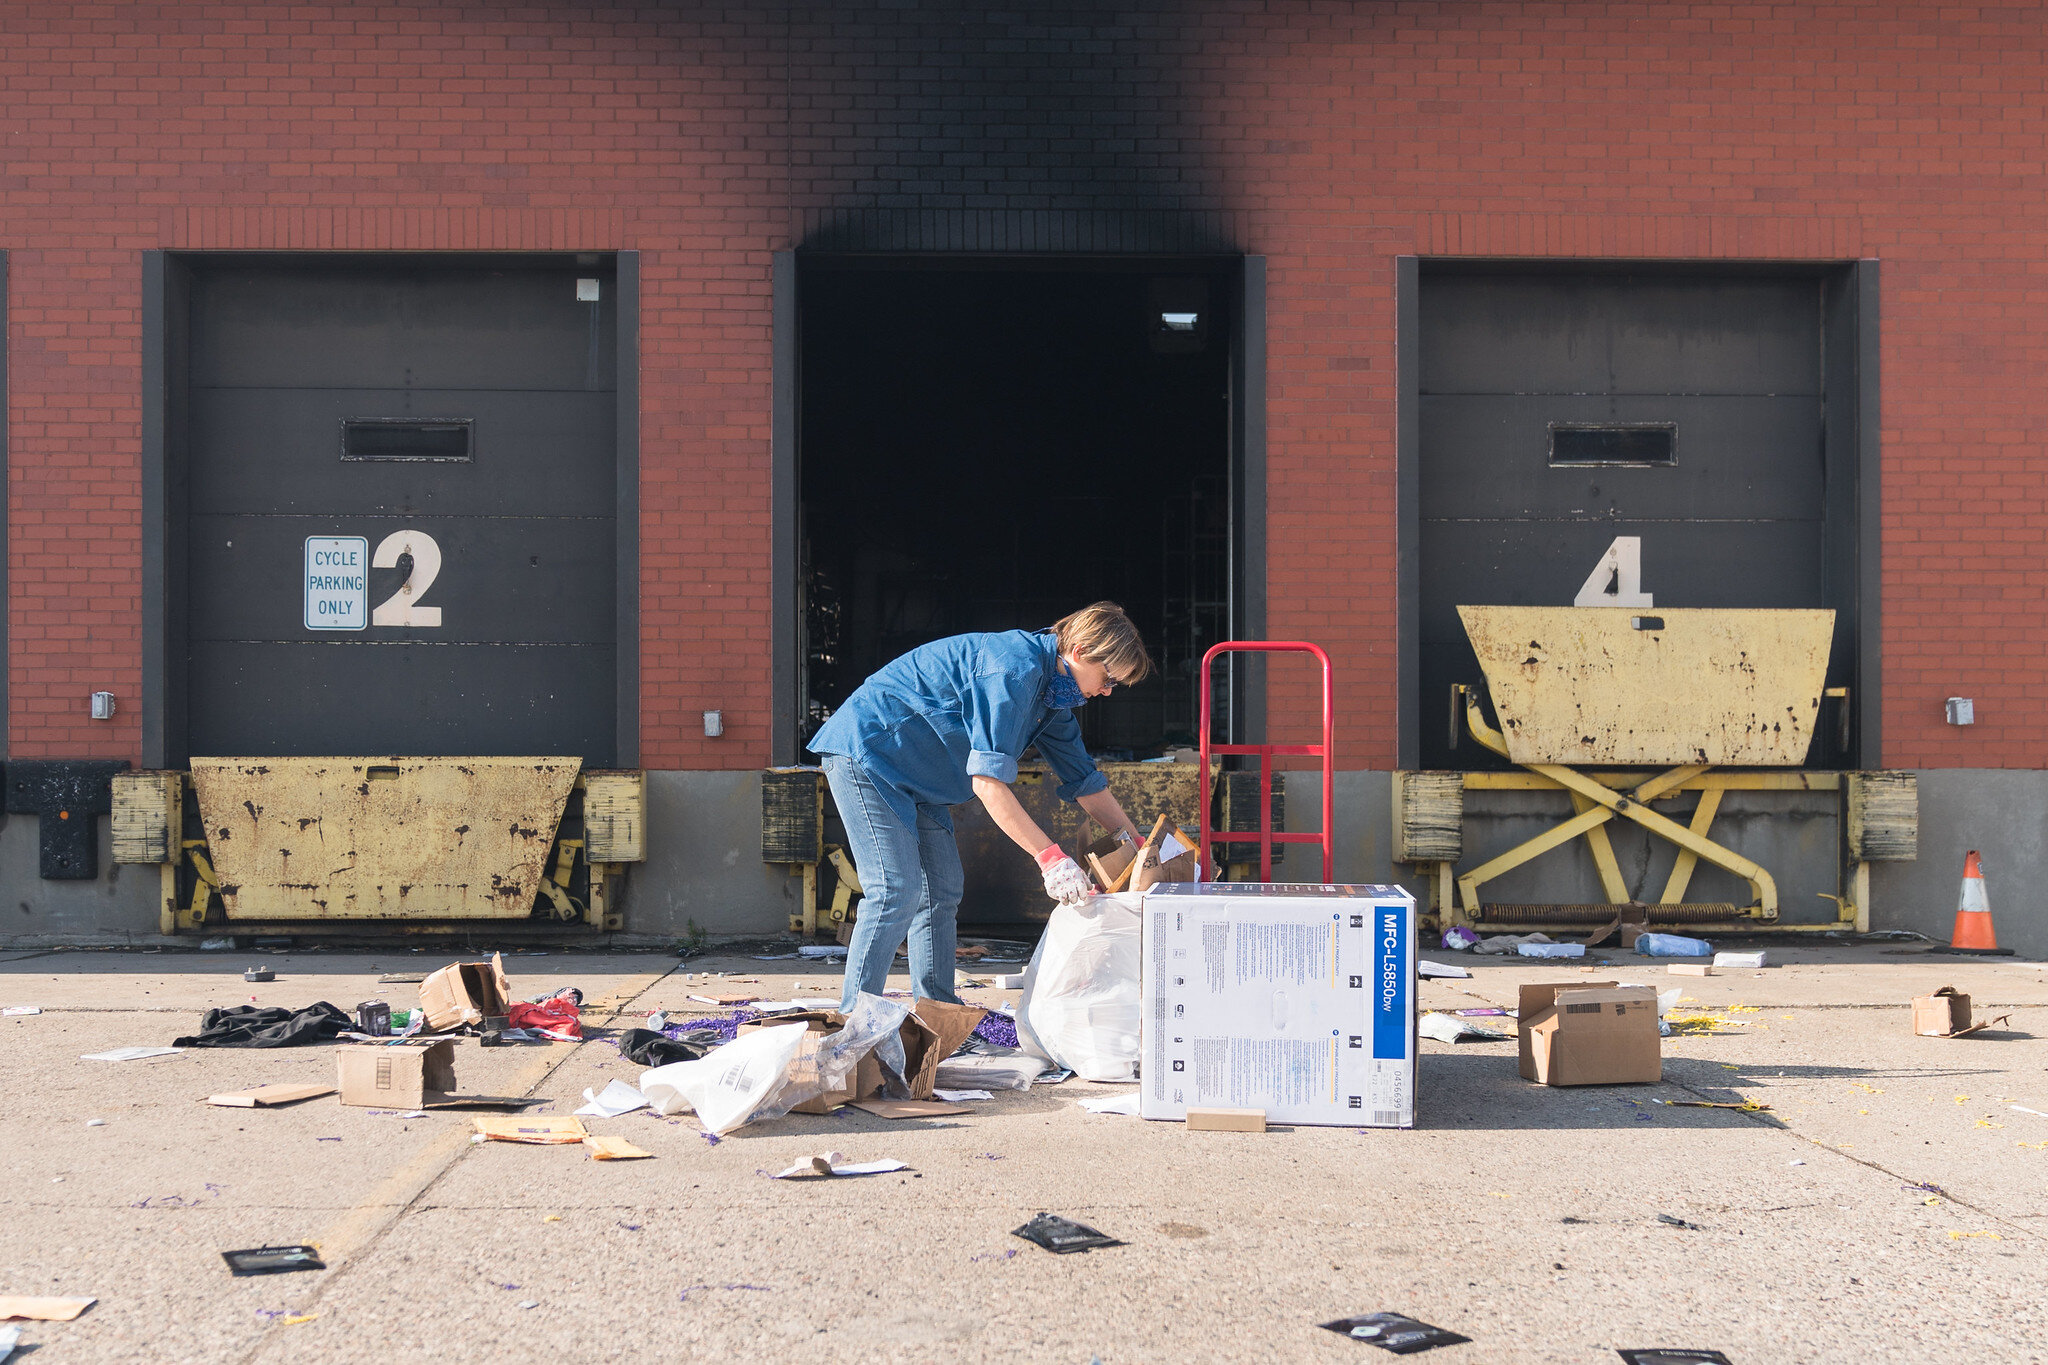  A woman cleans up trash and mail on Saturday morning behind the Post Office destroyed by rioters on Friday night in Minneapolis, Minnesota 